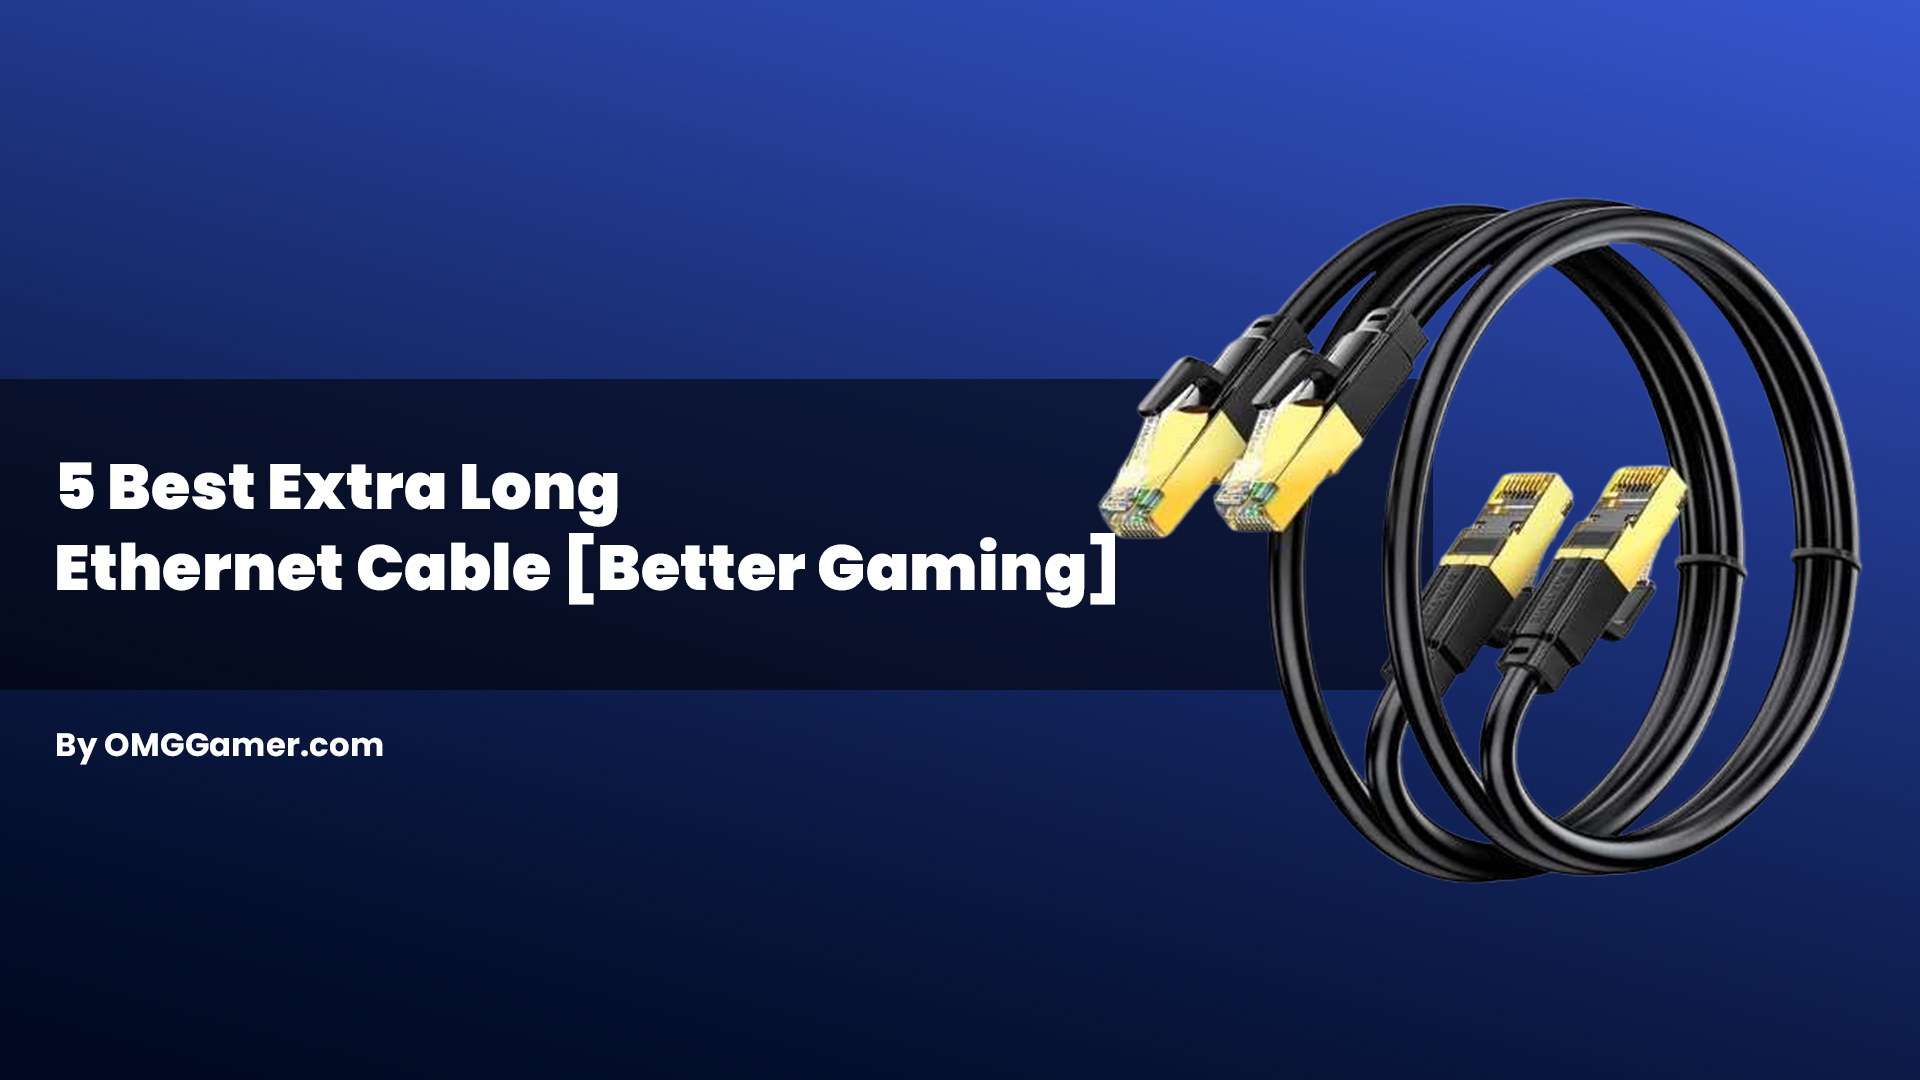 Best Extra Long Ethernet Cable